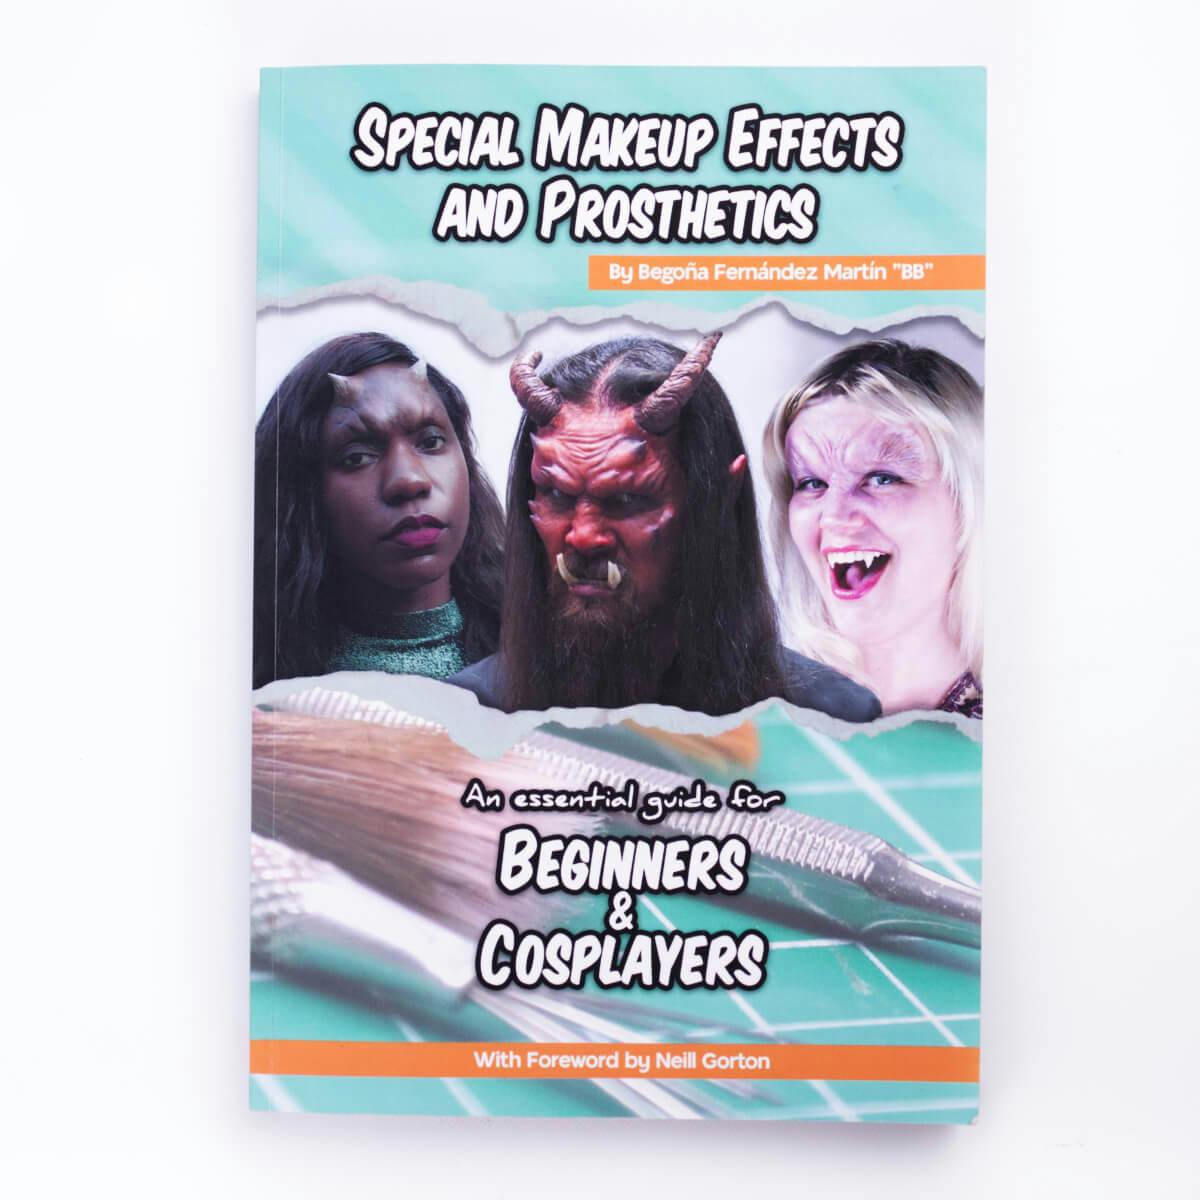 Kniha Special Makeup Effects and Prosthetics - the essential guide for beginners and cosplayers od Begoña F. Martín